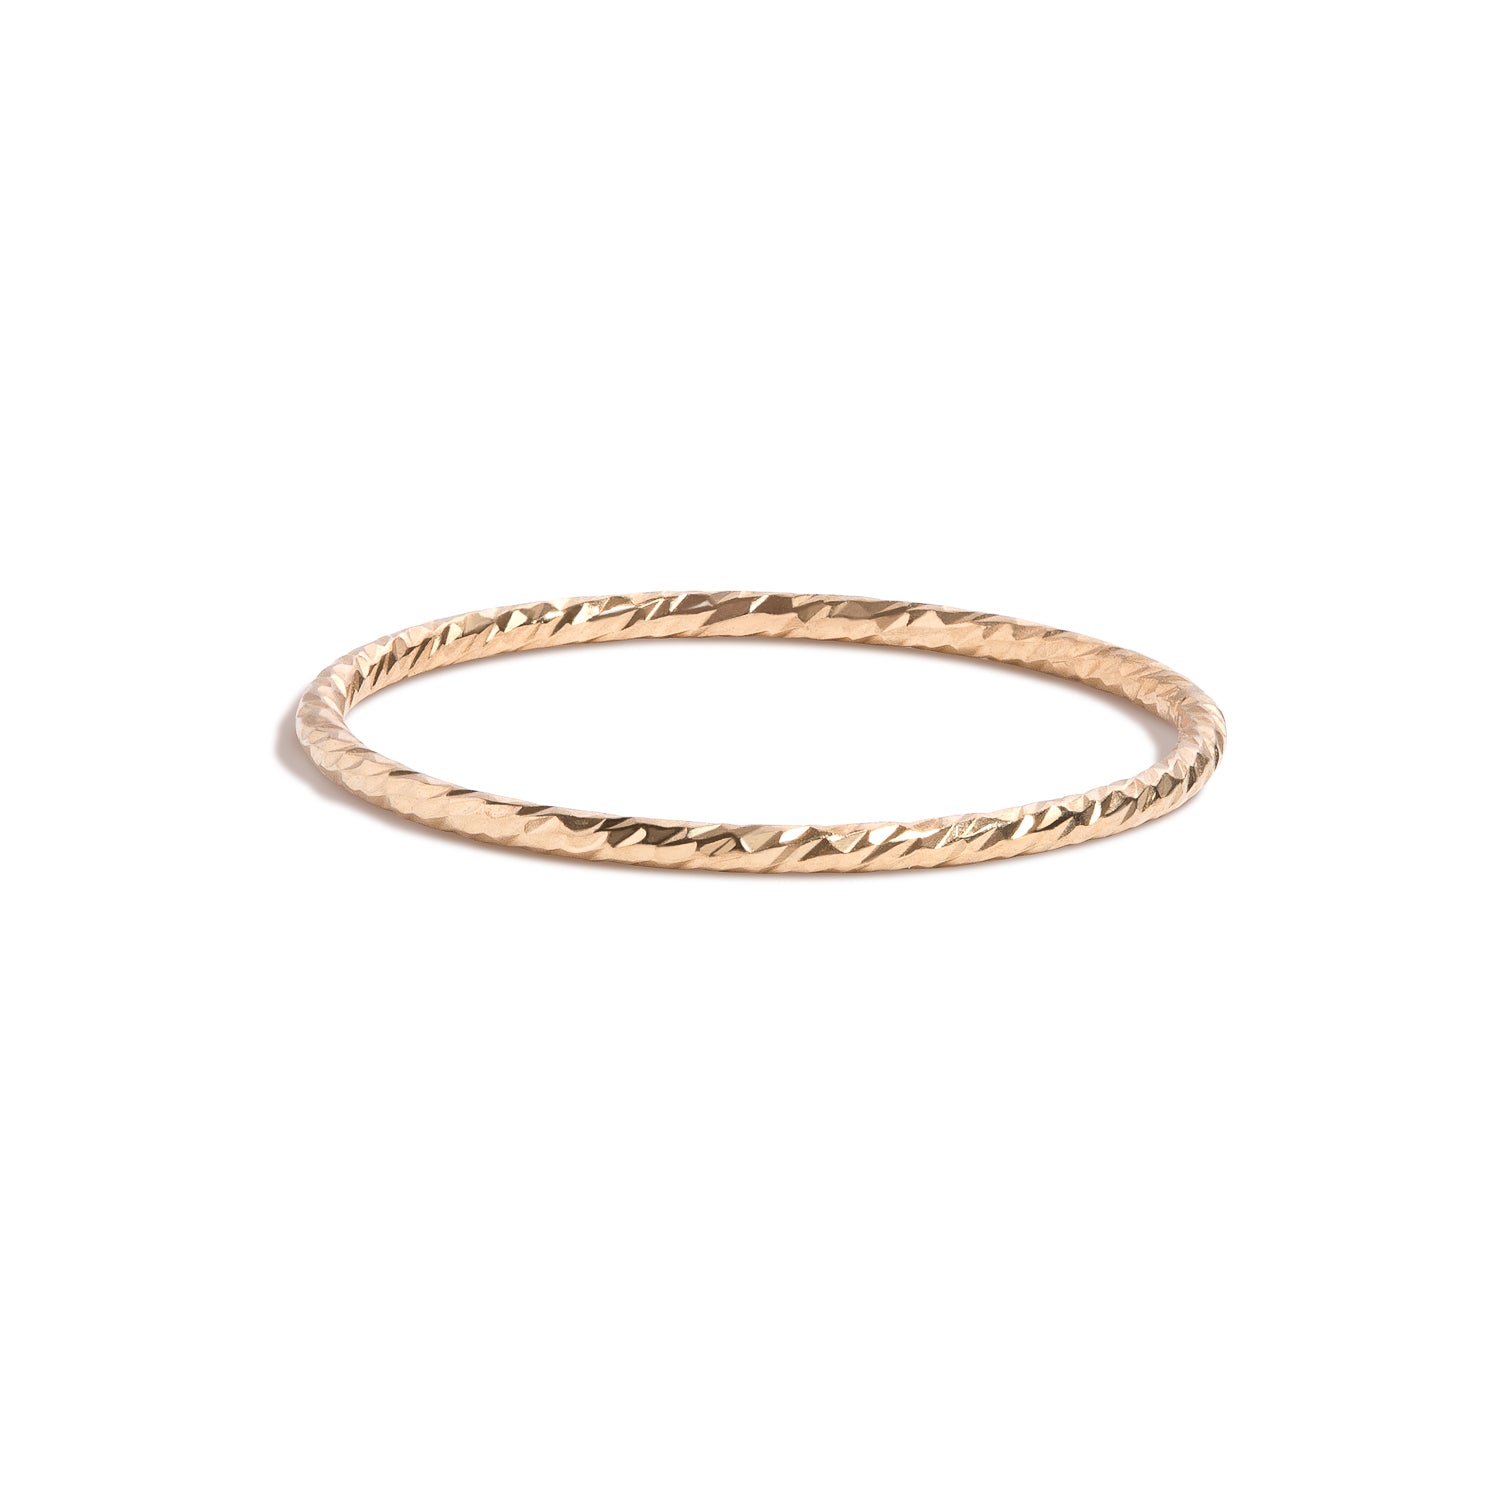 Shahla Karimi Jewelry Barely There Twisted Rope Band 14K Yellow Gold